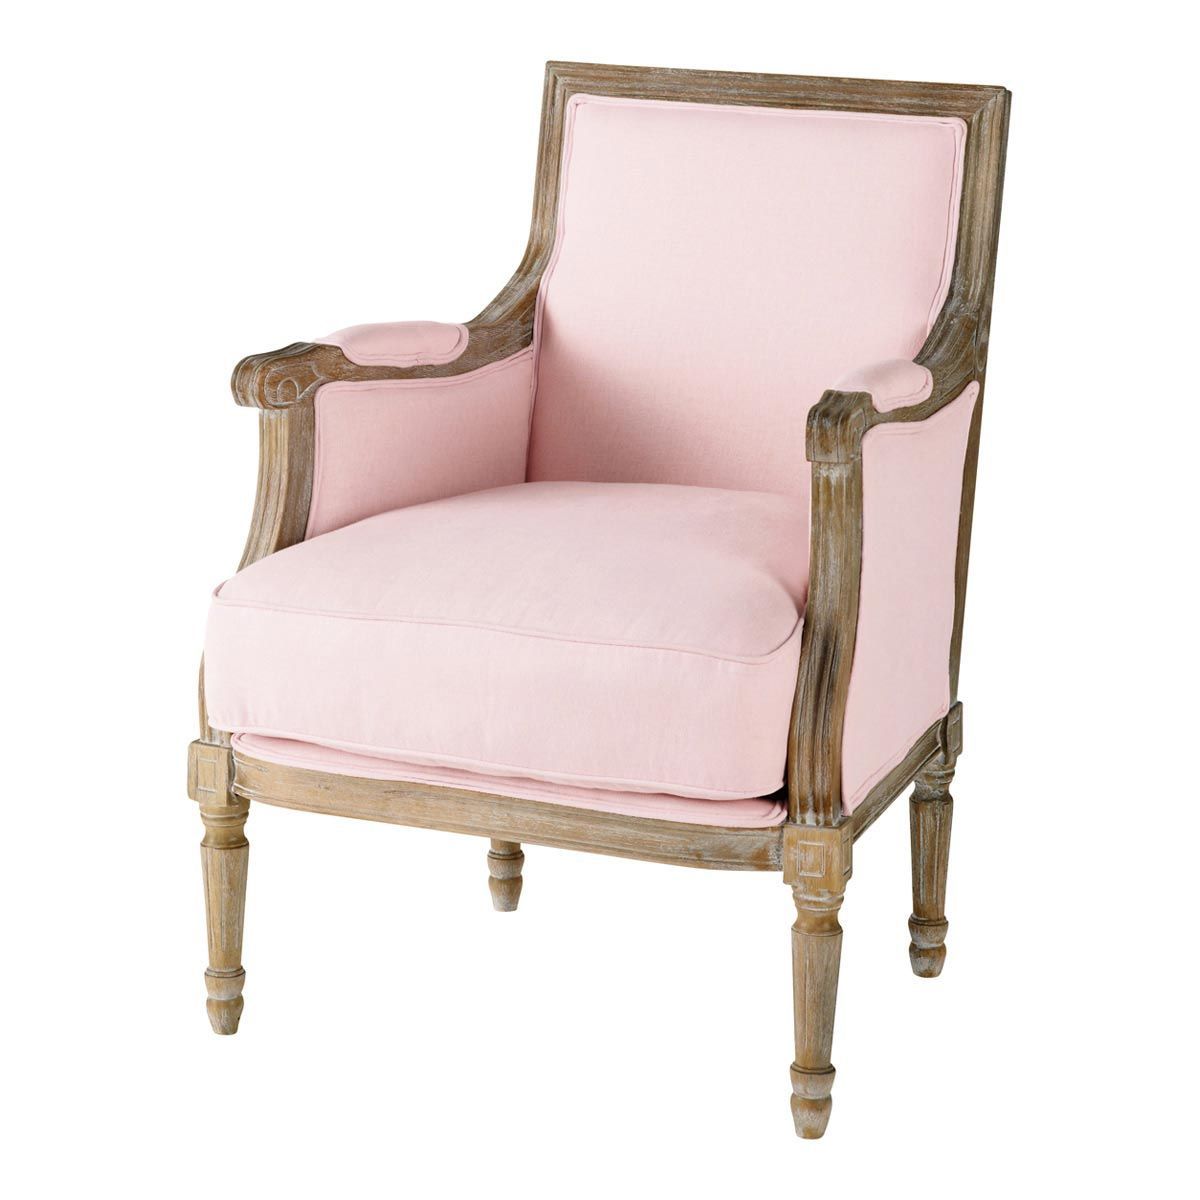 Linen Armchair In Pink | Maisons Du Monde | Arm Chairs Throughout Haleigh Armchairs (View 9 of 15)